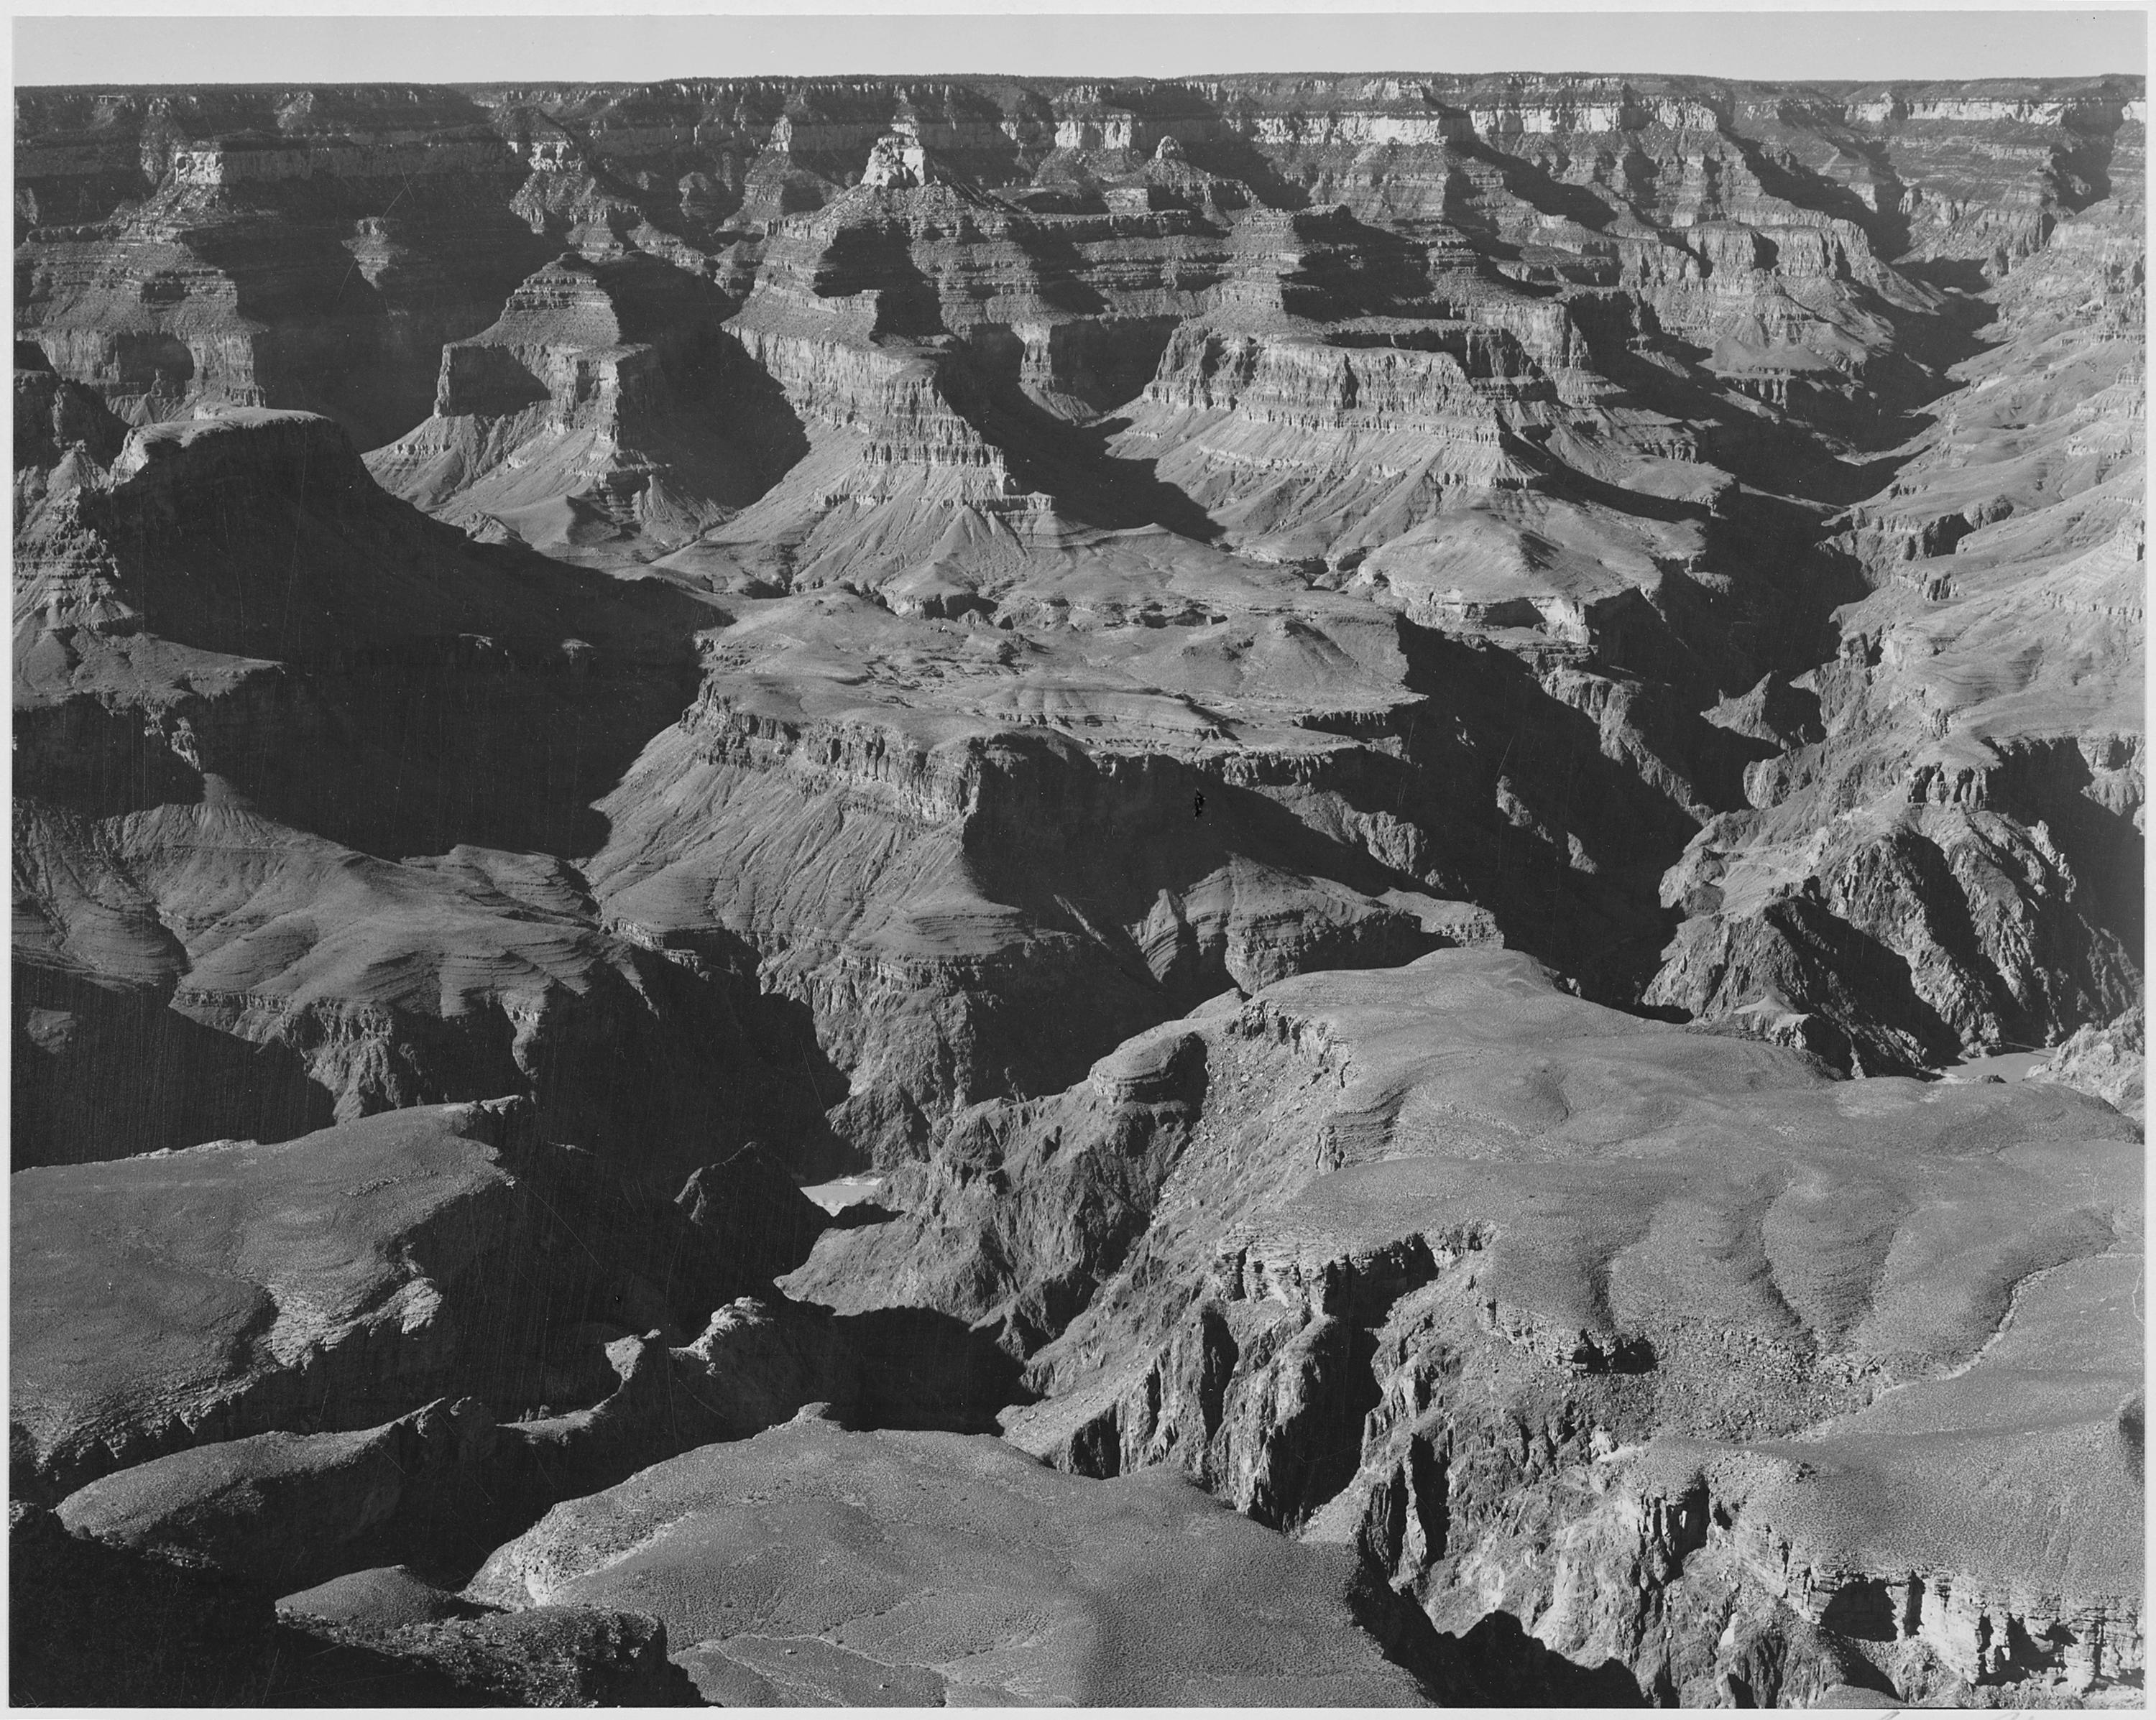 Ansel Adams - National Archives 79-AA-F17